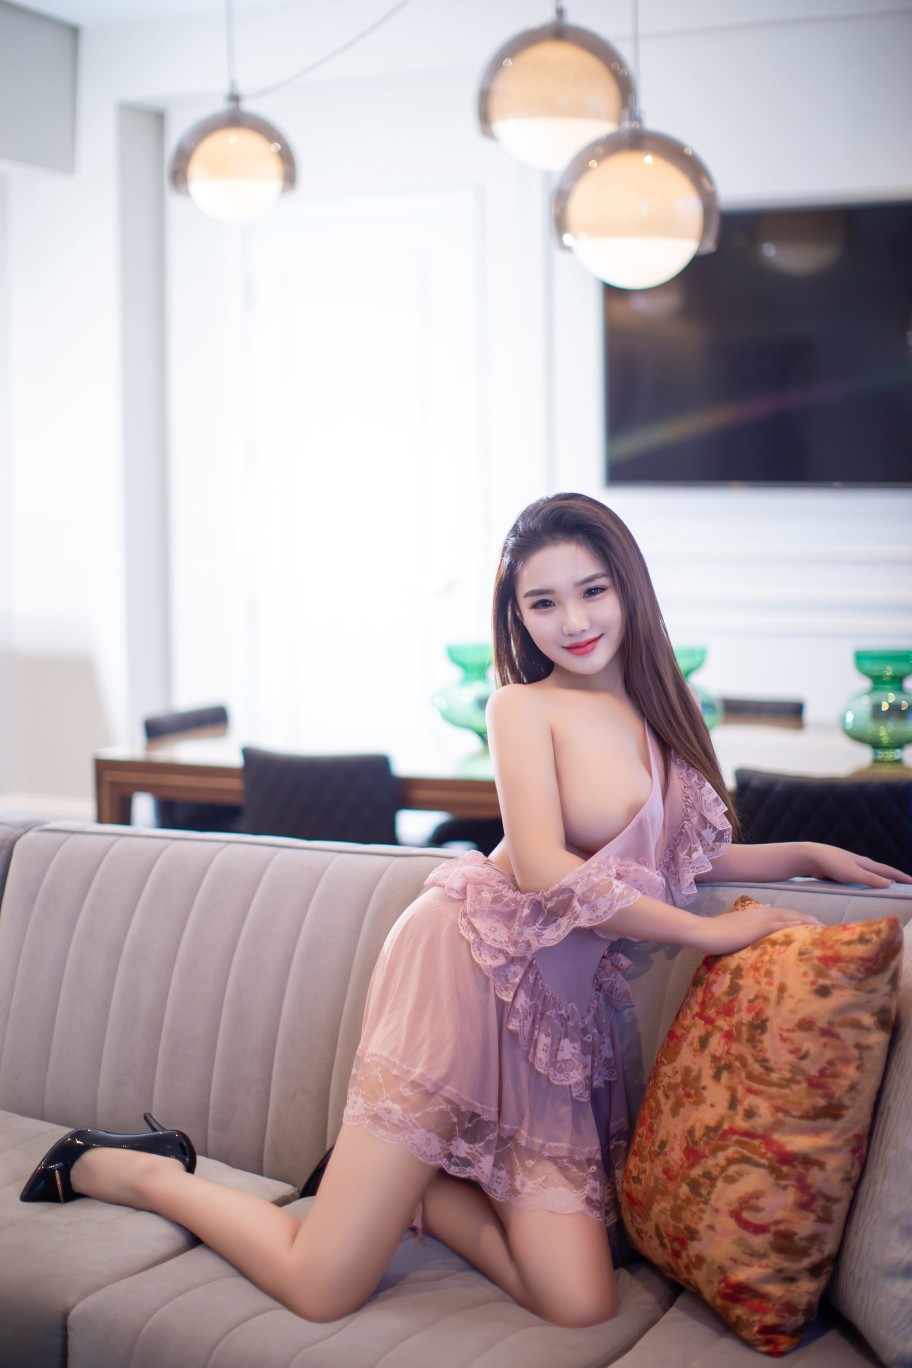 escorts companion upscale Interests Duo Couple-friendly Disability-friendly Non-smoking Age Young Figure Curvy Tall Breasts Natural Hair Brunette Ethnicity European Tattoos None 